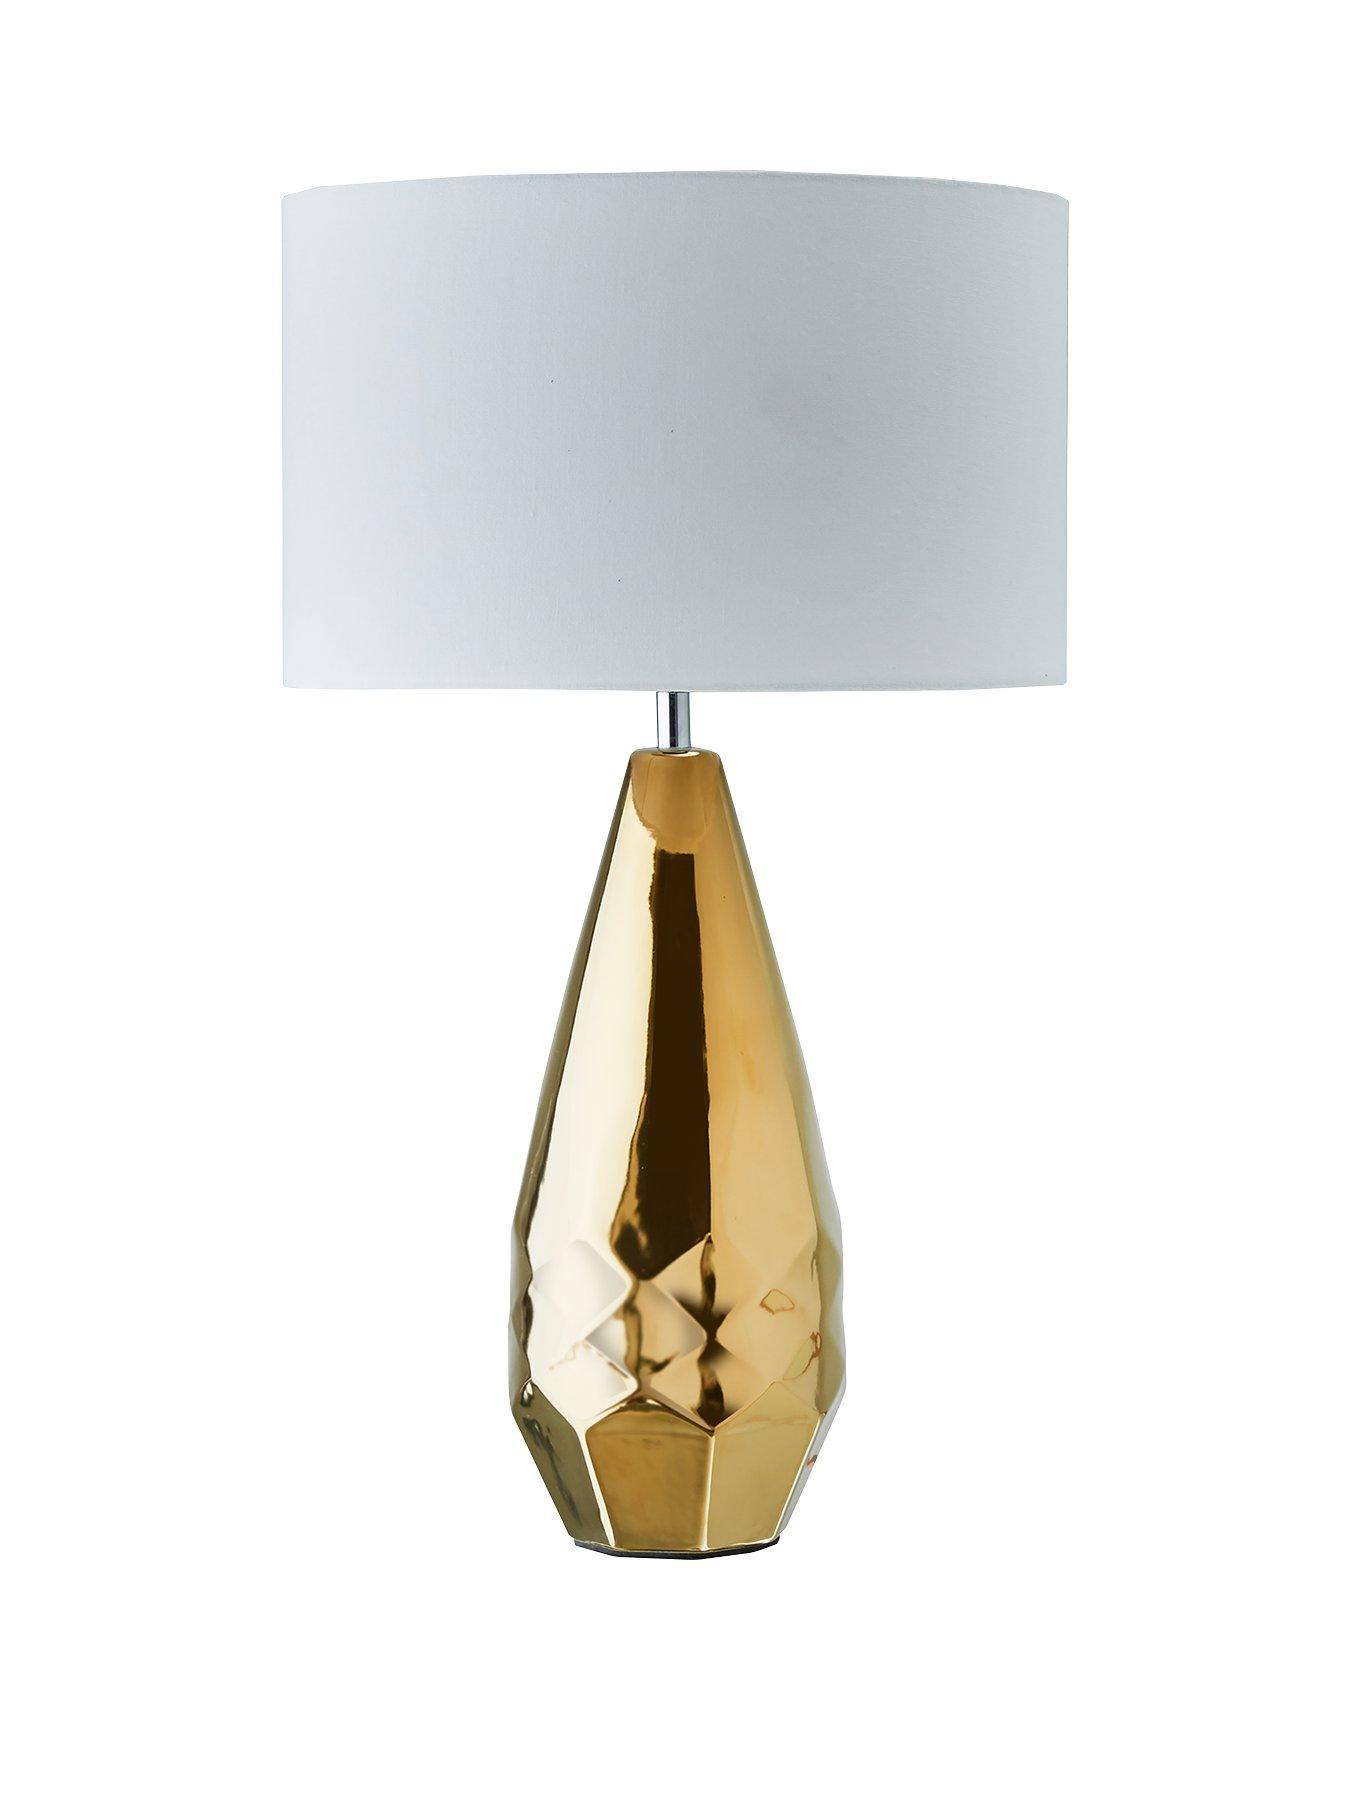 Gold and white geo lamp - home accessories inspiration| Today we're talking inspiration for adding green to your living room. Green is a really versatile colour to decorate your home with. But, which colours and tones work well? What kind of accessories work with green? This post gives you ideas for pulling together an elegant green colour palette and pieces for your home. Read more: kittyandb.com #homeaccessories #lamp #goldandwhite #interiordecoratinginspiration